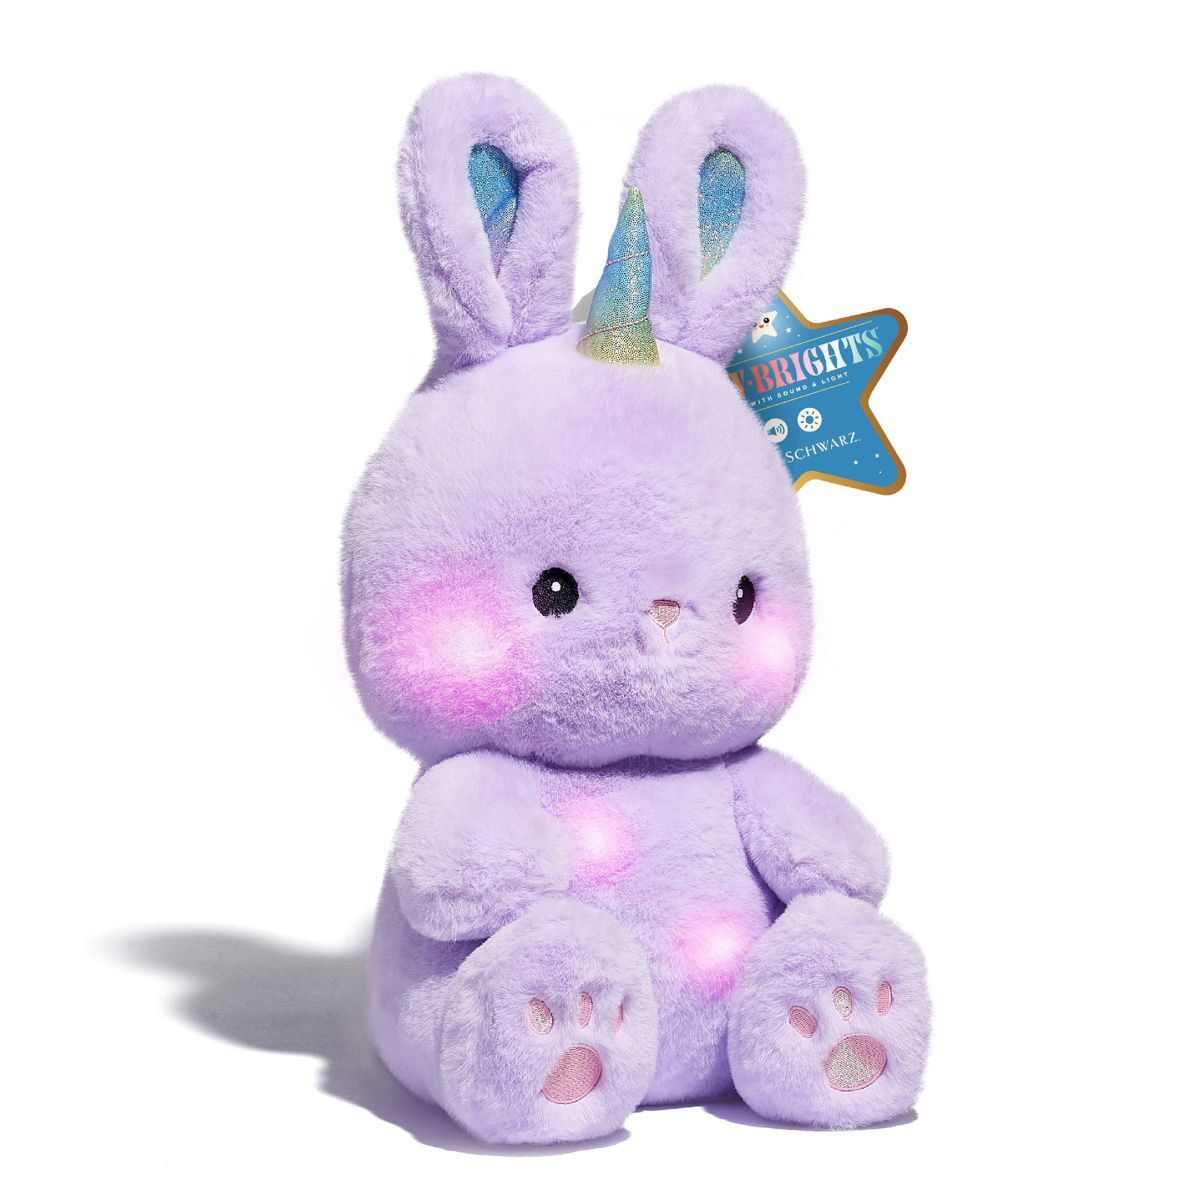 FAO Schwarz 15" Glow Brights LED with Sound Bunnycorn Toy Pink Plush | Target